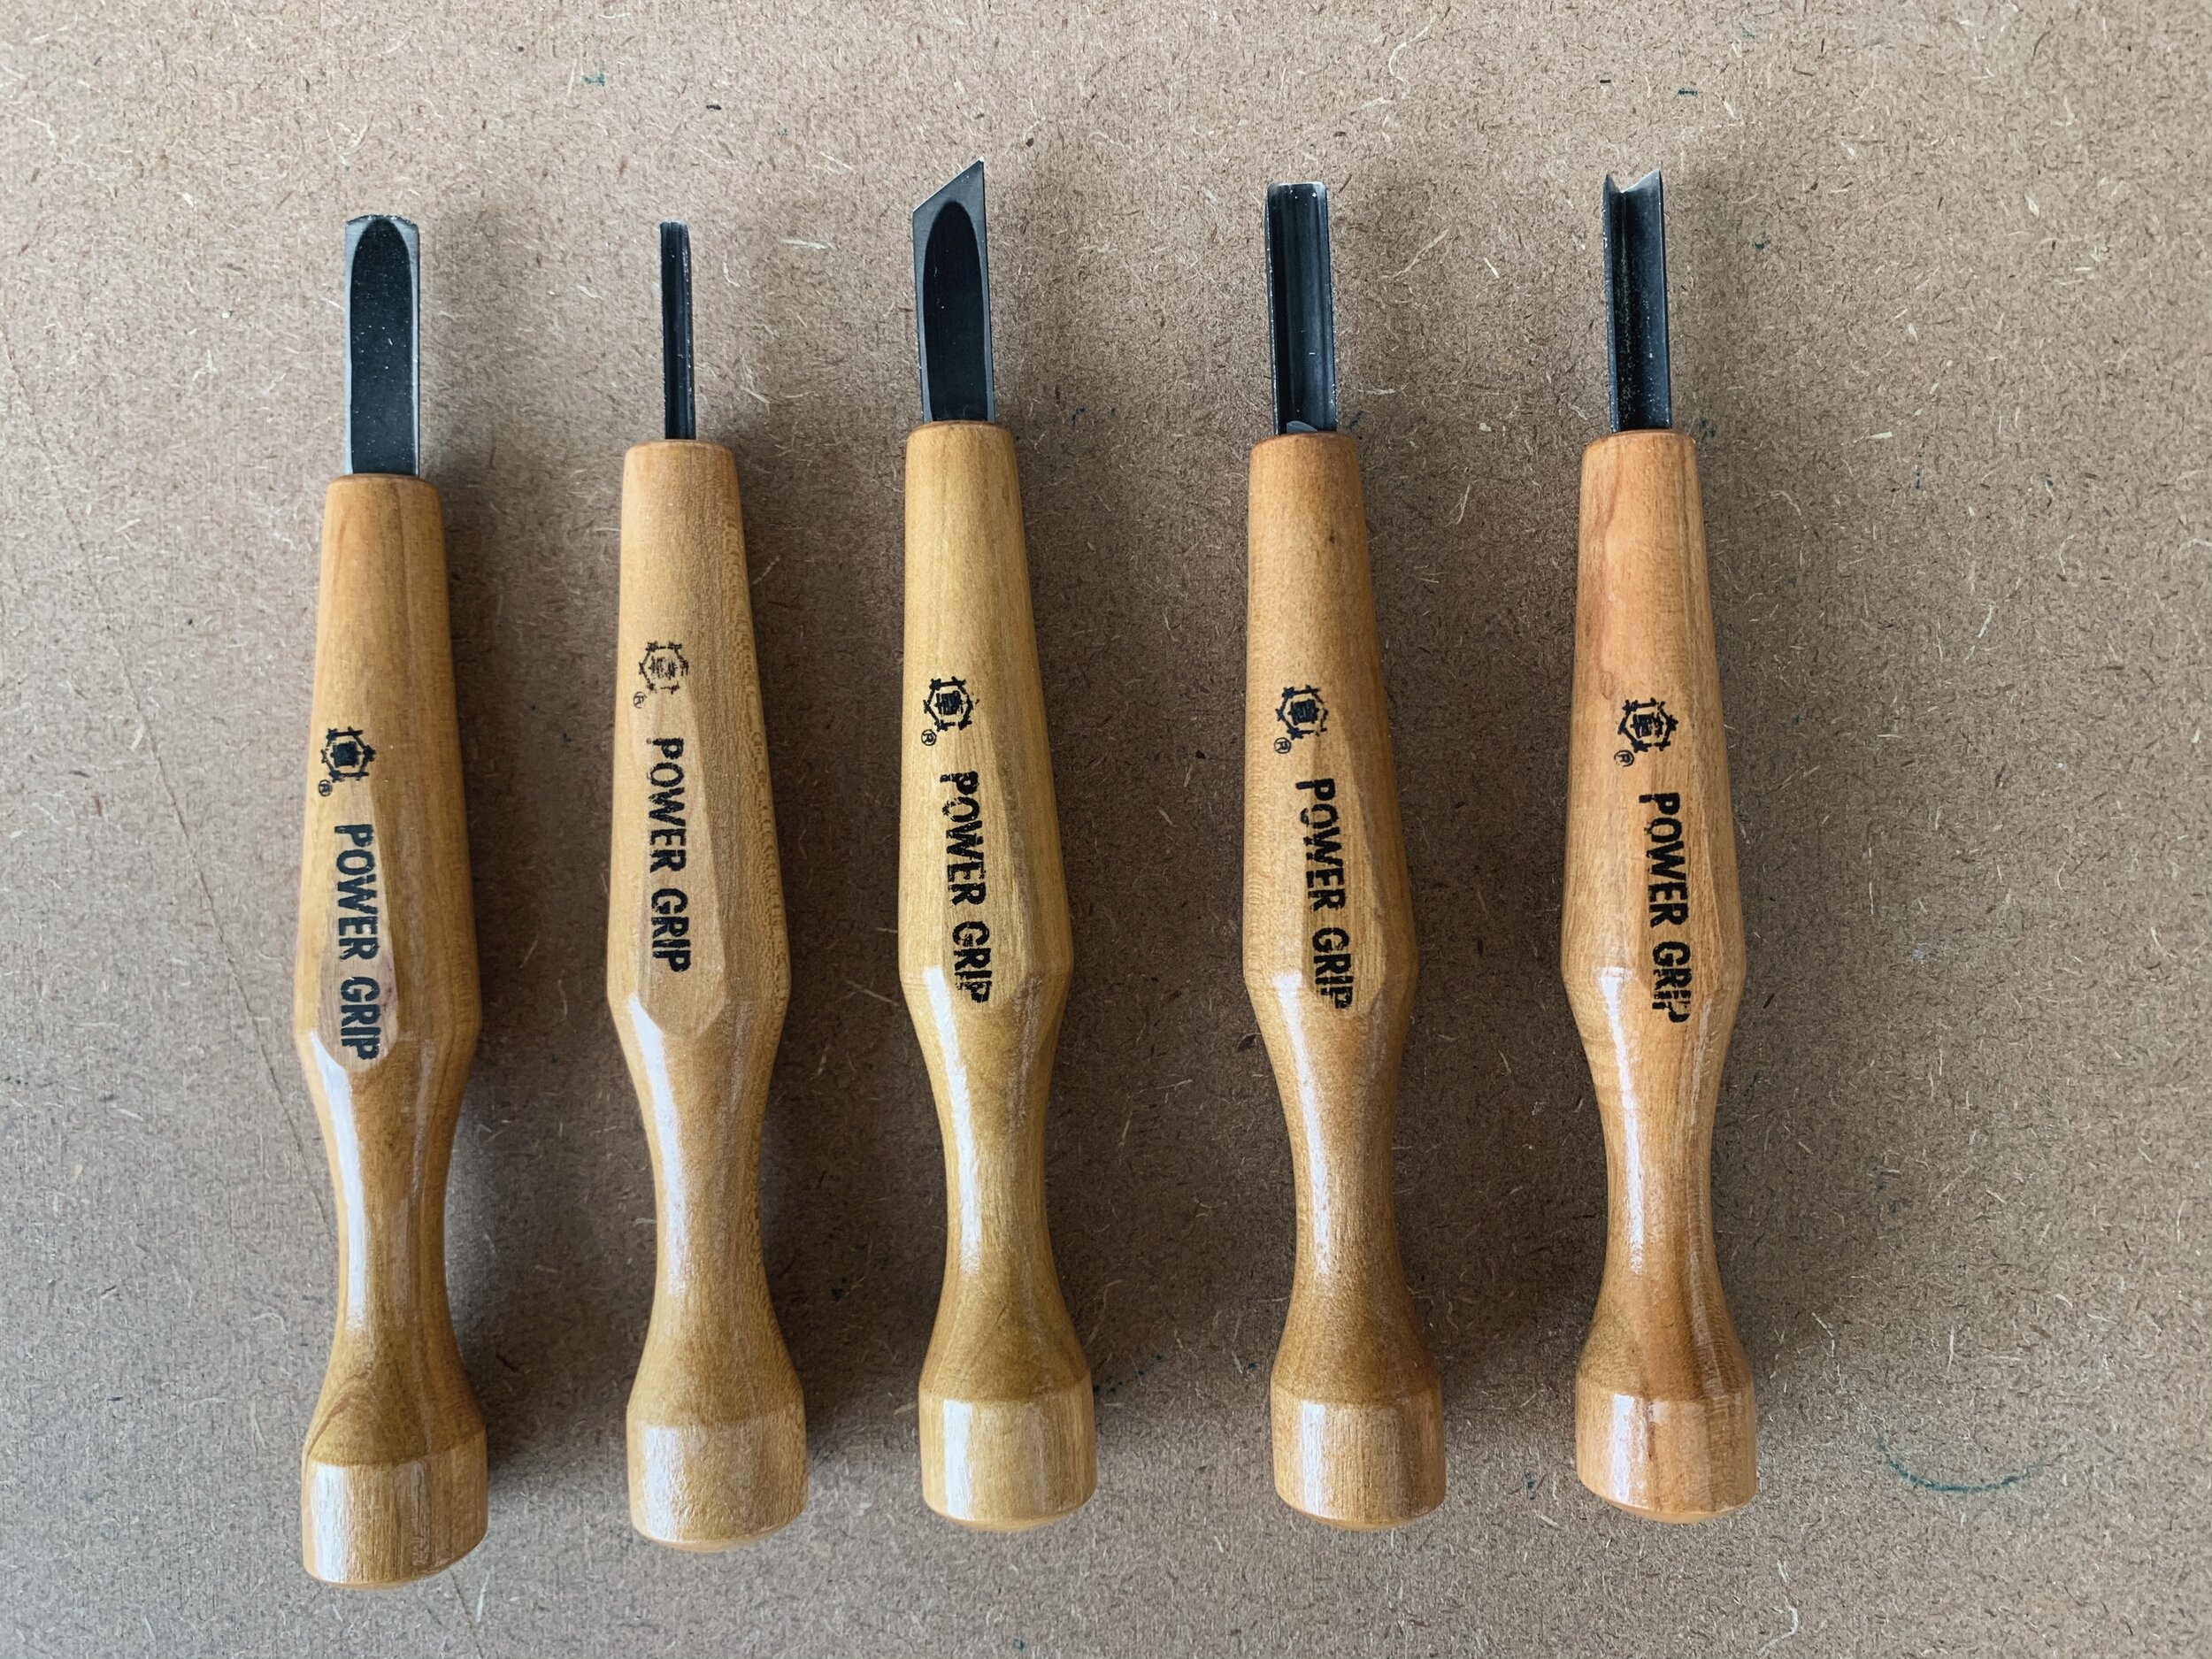 can you use wood carving tools on linoleum?